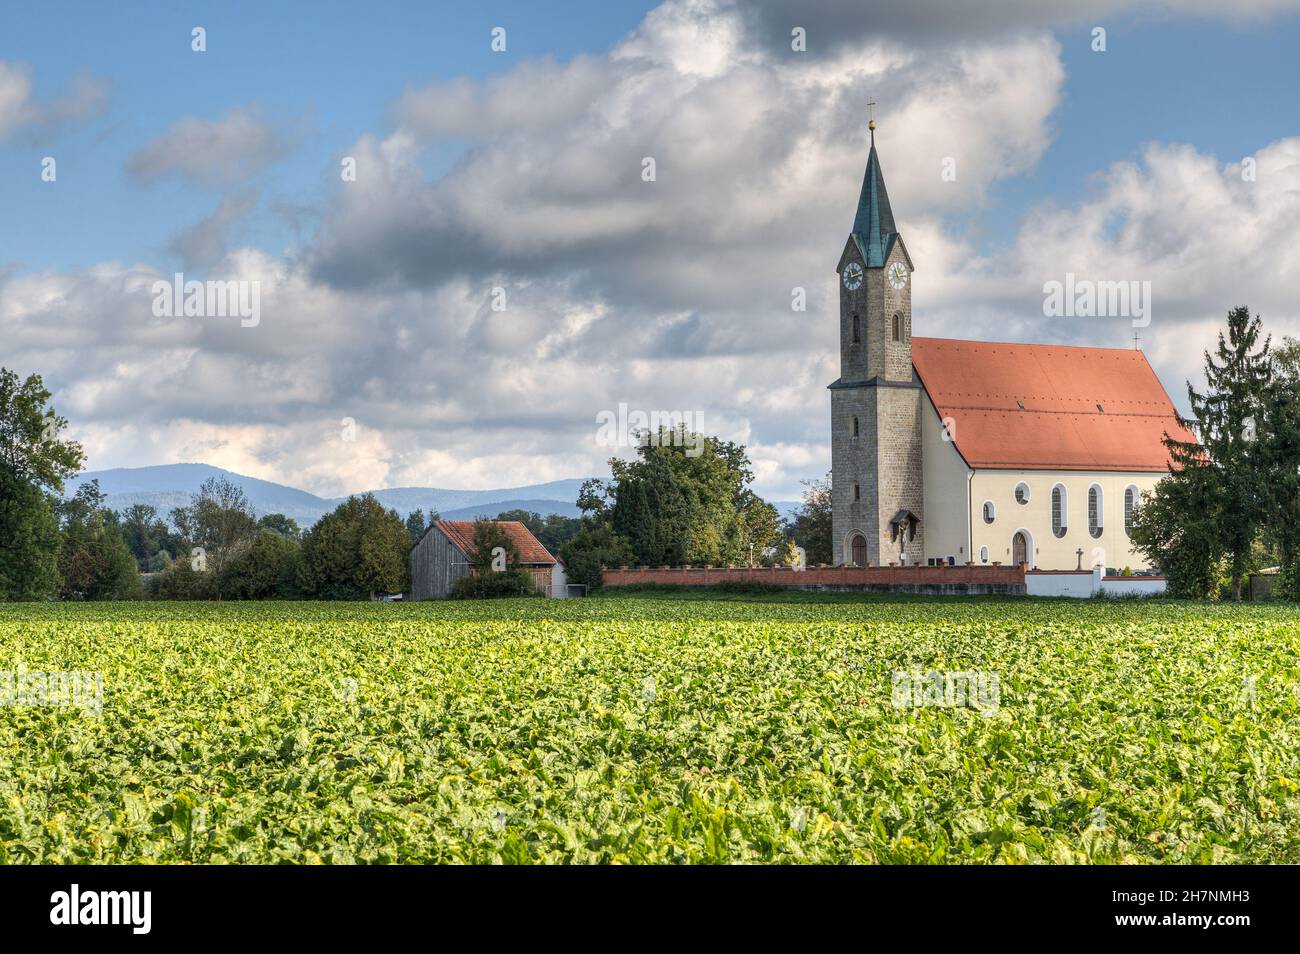 The parish church near the small town of Moos in Bavaria was built between 1624-1628 and is dedicated to Saints Simon and Jude Thaddhäus. Stock Photo